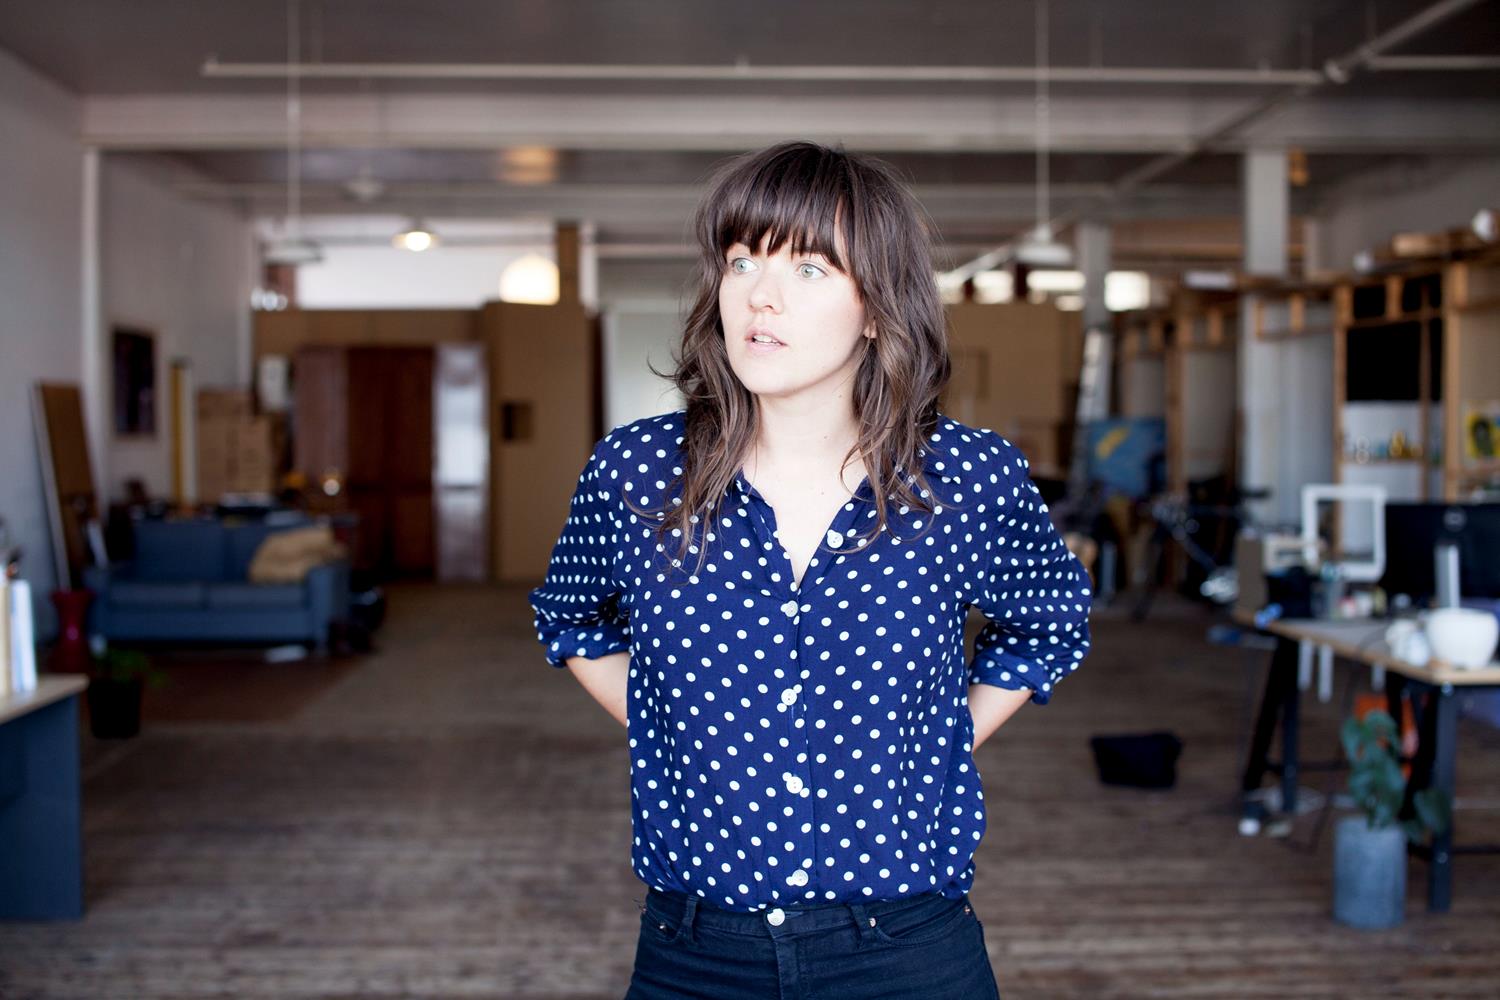 Courtney Barnett announces LP 'Sometimes I Sit And Think, And Sometimes I Just Sit